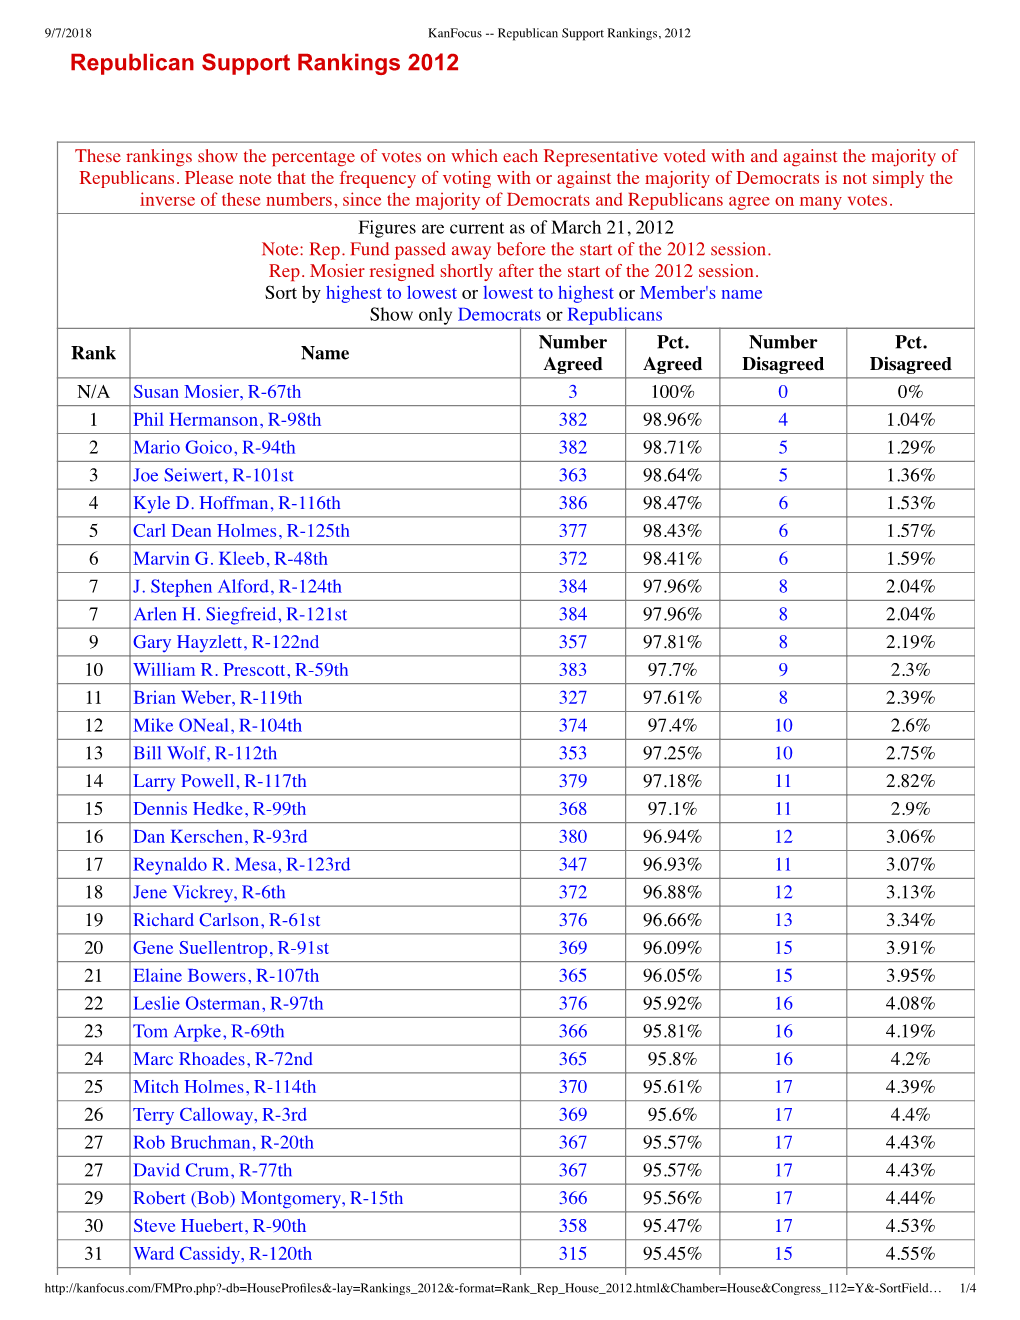 Republican Support Rankings 2012